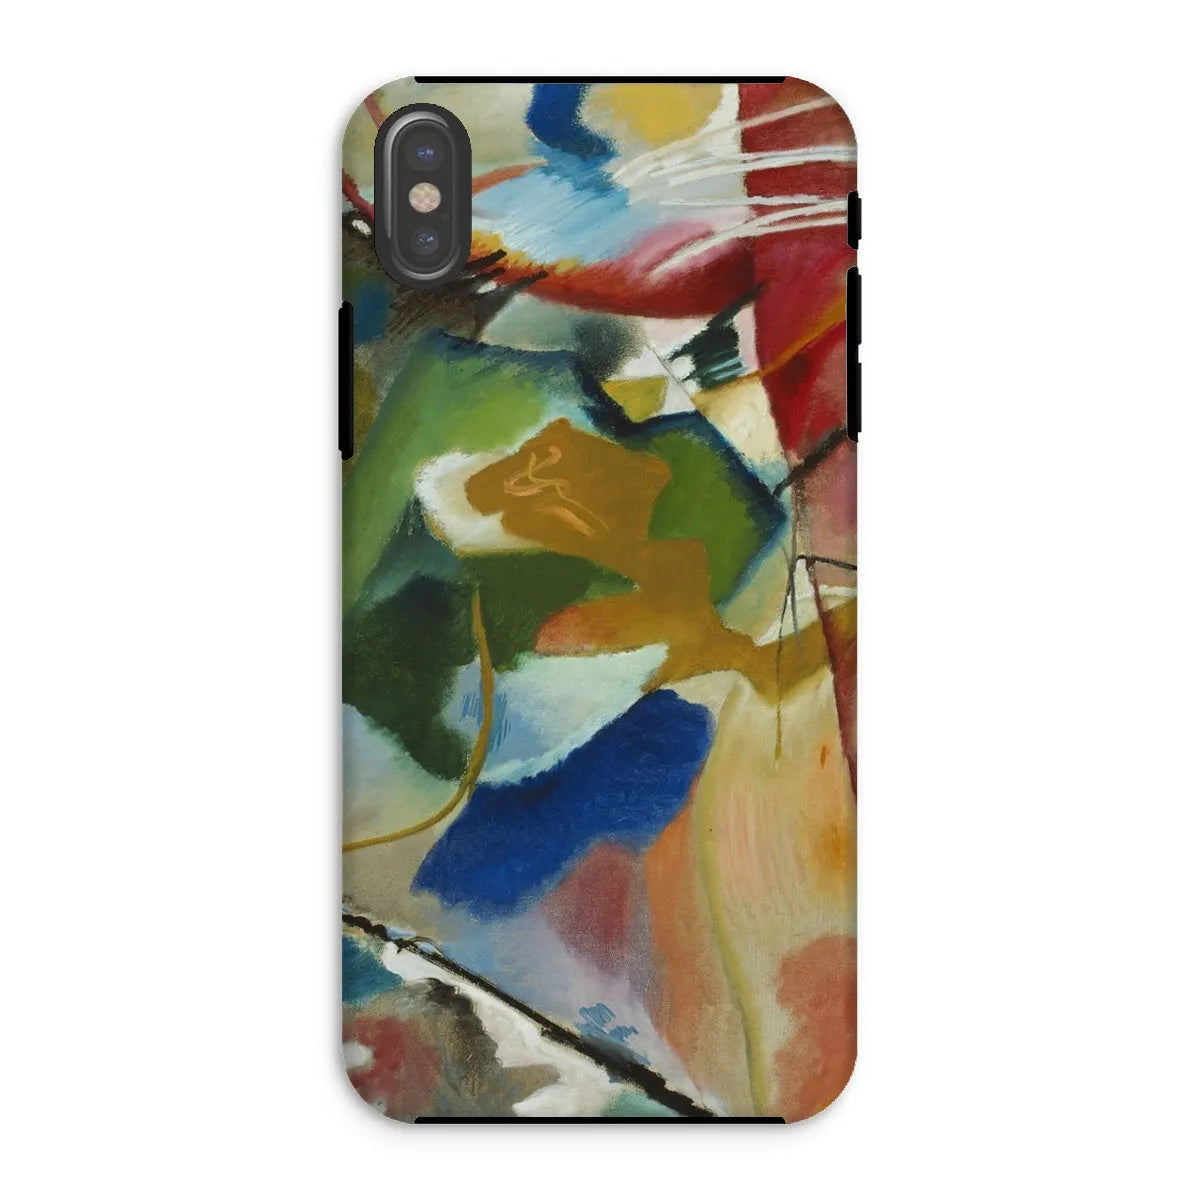 Painting With Green Center Art Phone Case - Wassily Kandinsky - Iphone Xs / Matte - Mobile Phone Cases - Aesthetic Art